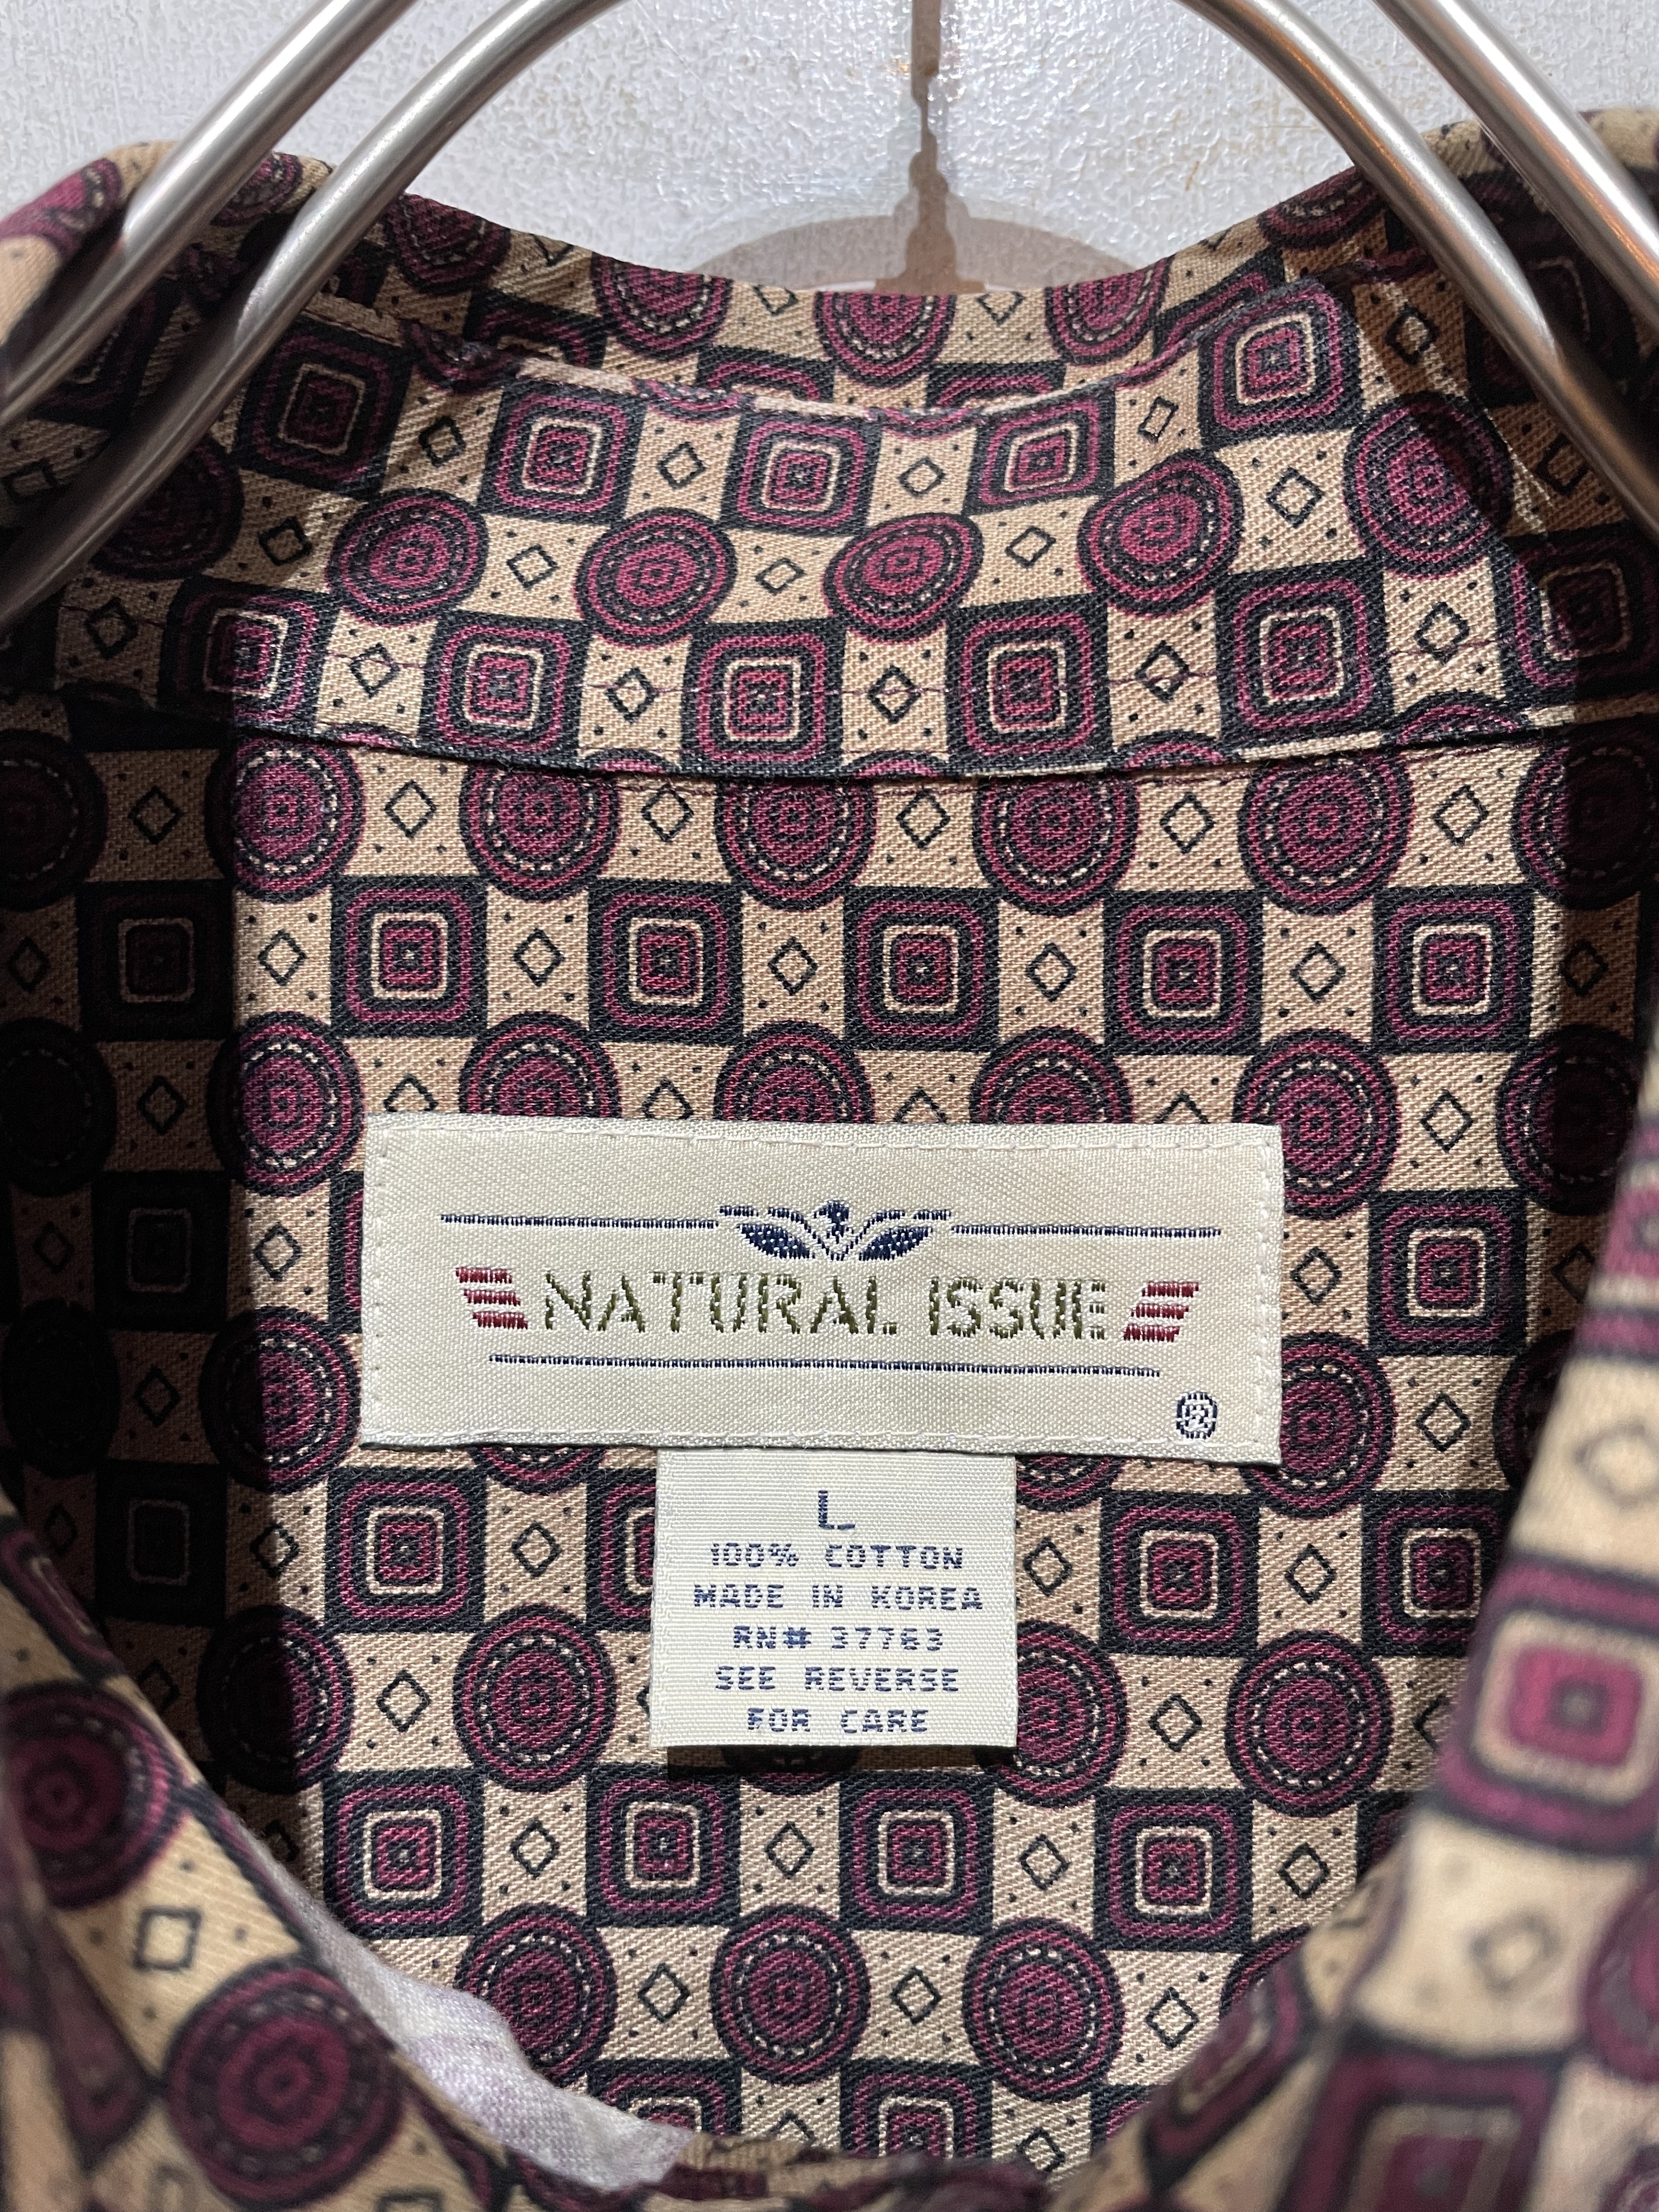 “NATURAL ISSUE” L/S Pattern Shirt